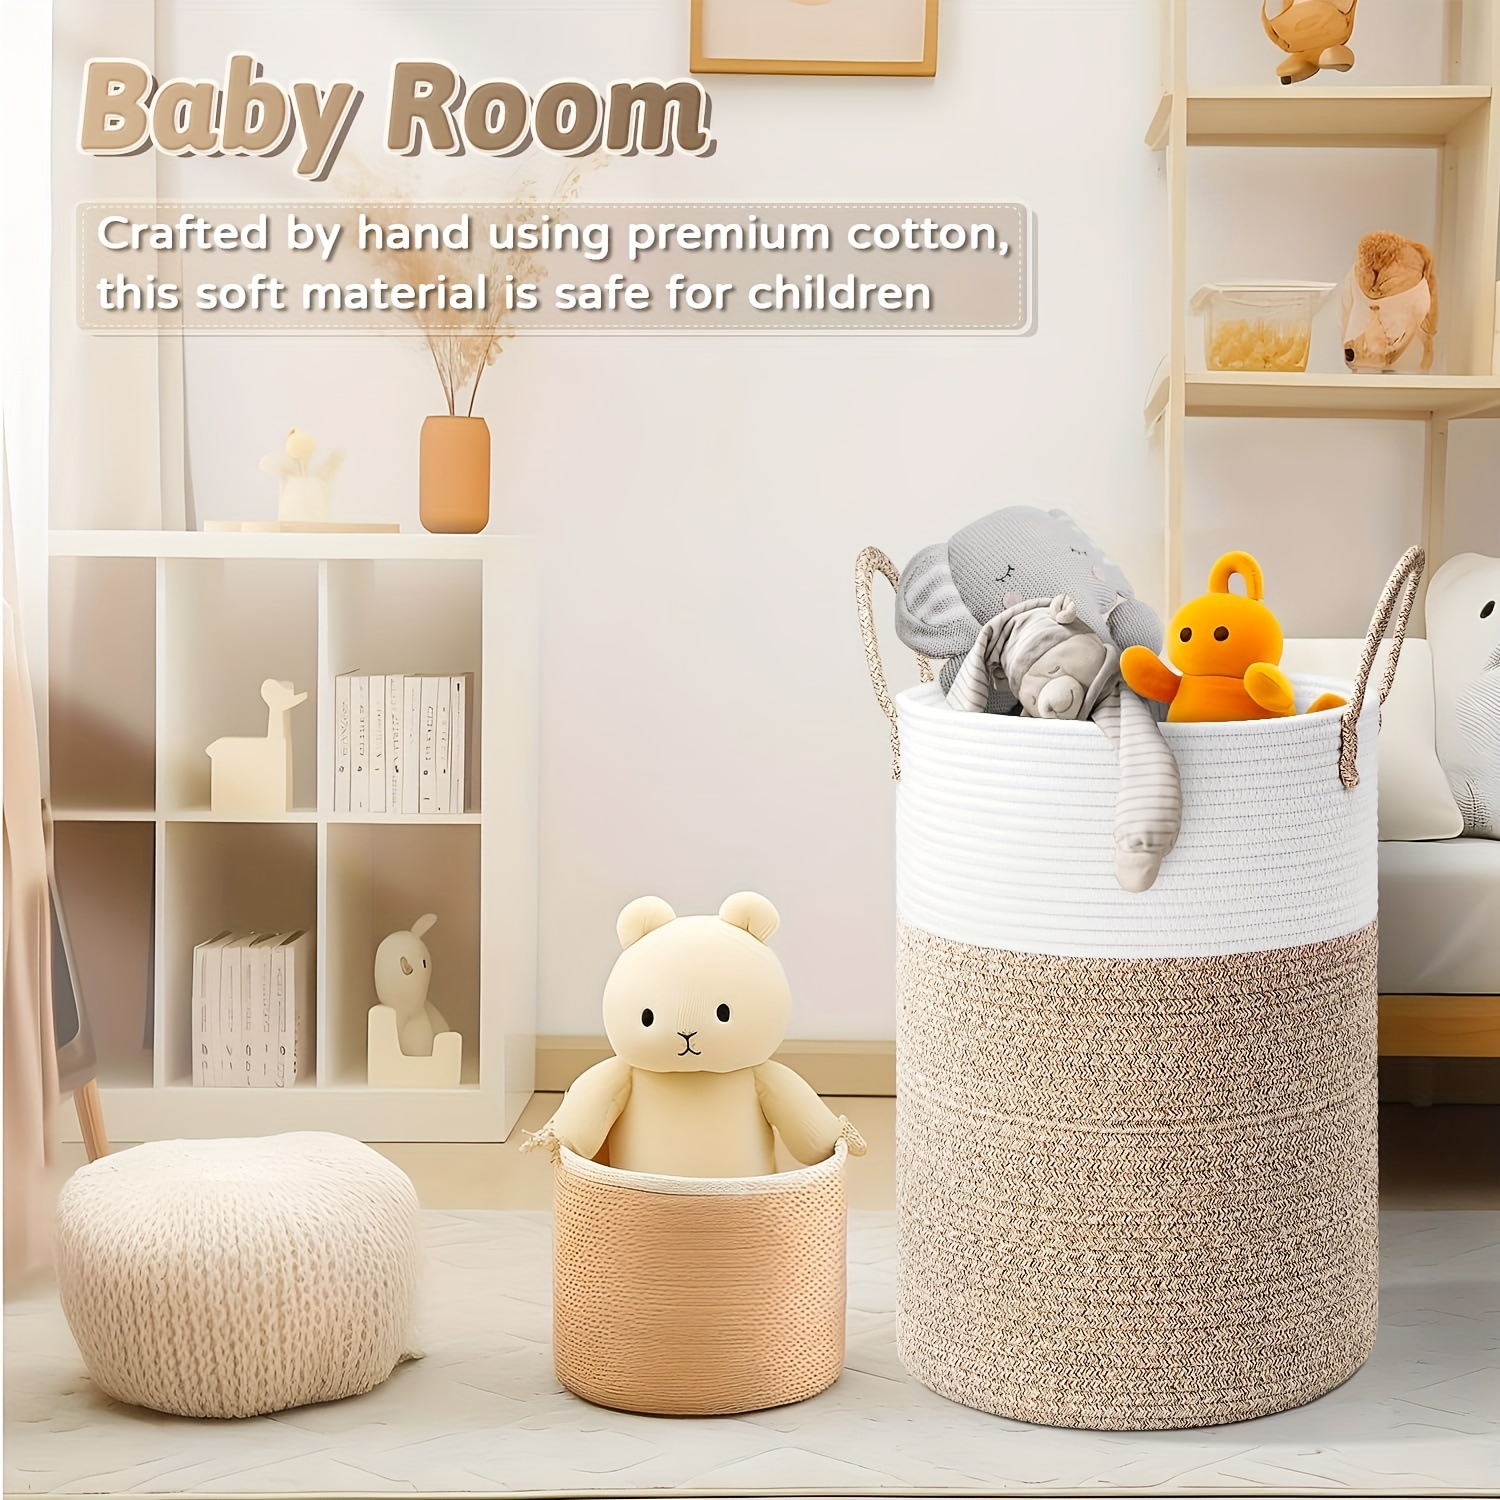 

Laundry Basket, Woven Cotton Rope Laundry Hamper, 60l For Decorative Storage Of Dirty Clothes, Toys And Blankets In Bathroom, Baby Room And Living Room